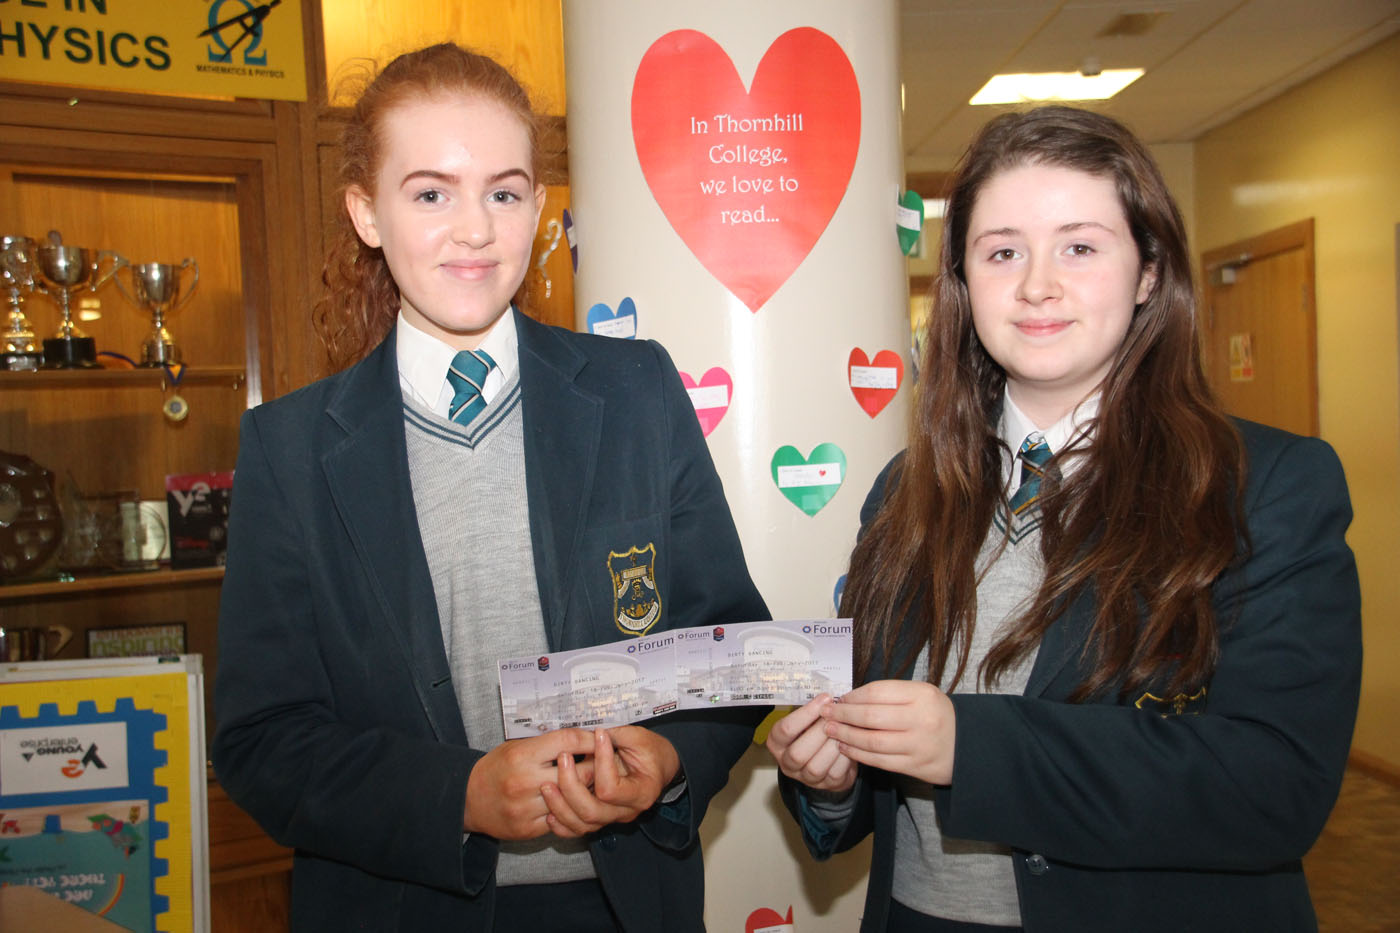 Katie May Duffin (9B) wins tickets for 'Dirty Dancing'